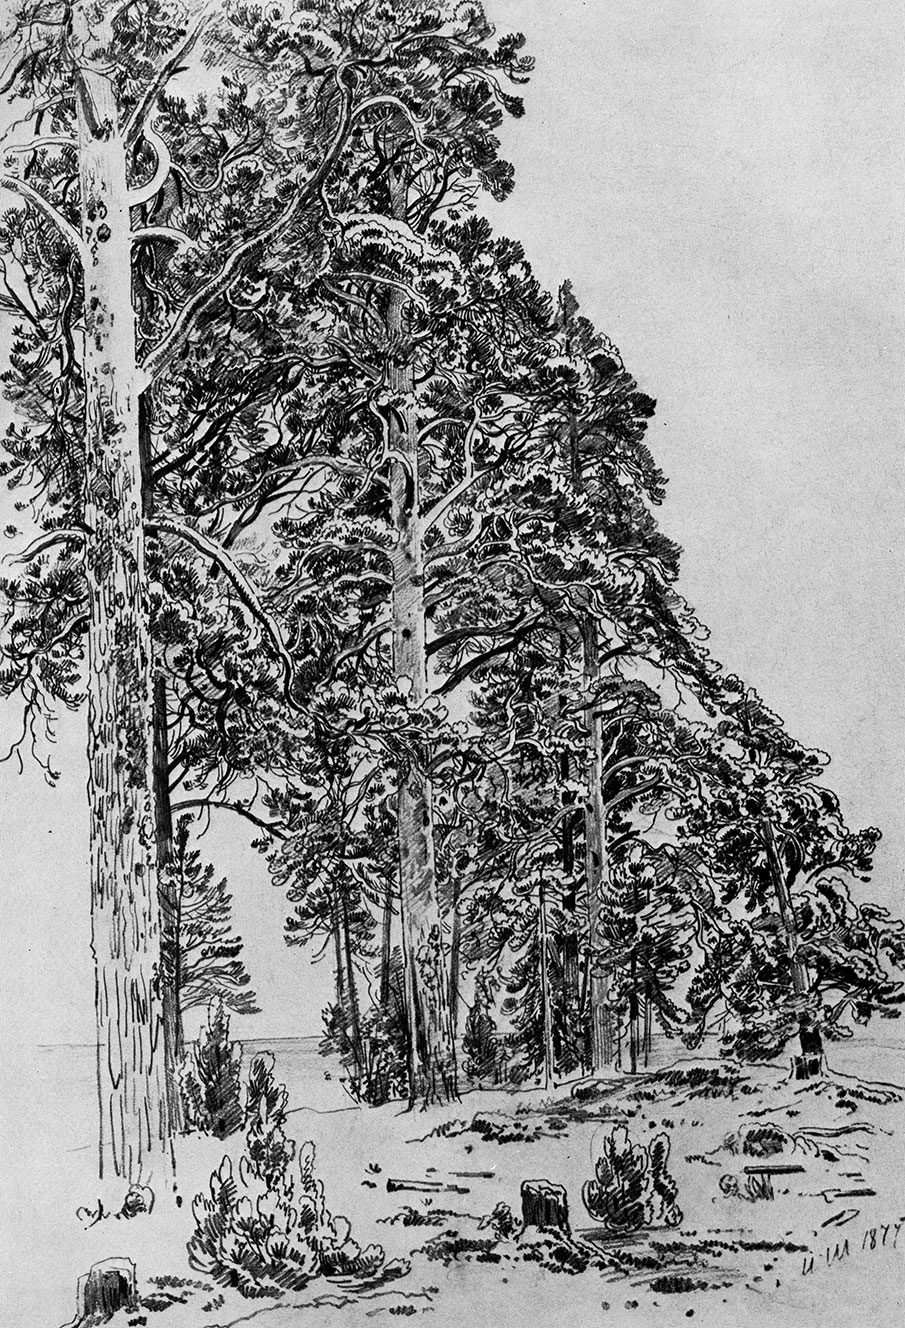 61. Pines on the seashore. 1877. Lead pencil on paper, mounted on cardboard. 58.5X41.1 cm. The Russian Museum, Leningrad